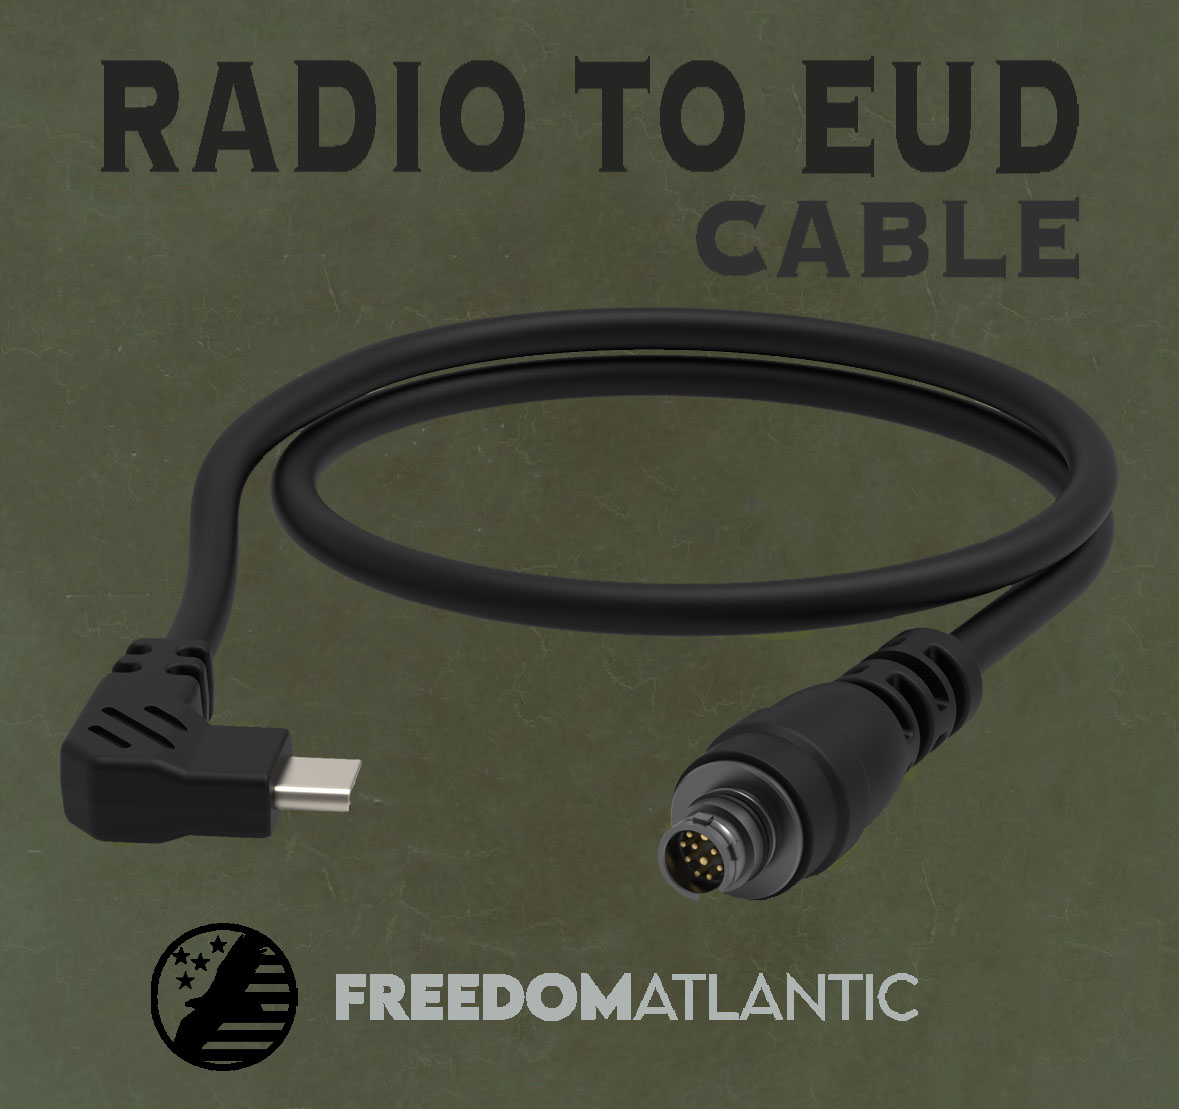 Radio to EUD Cable